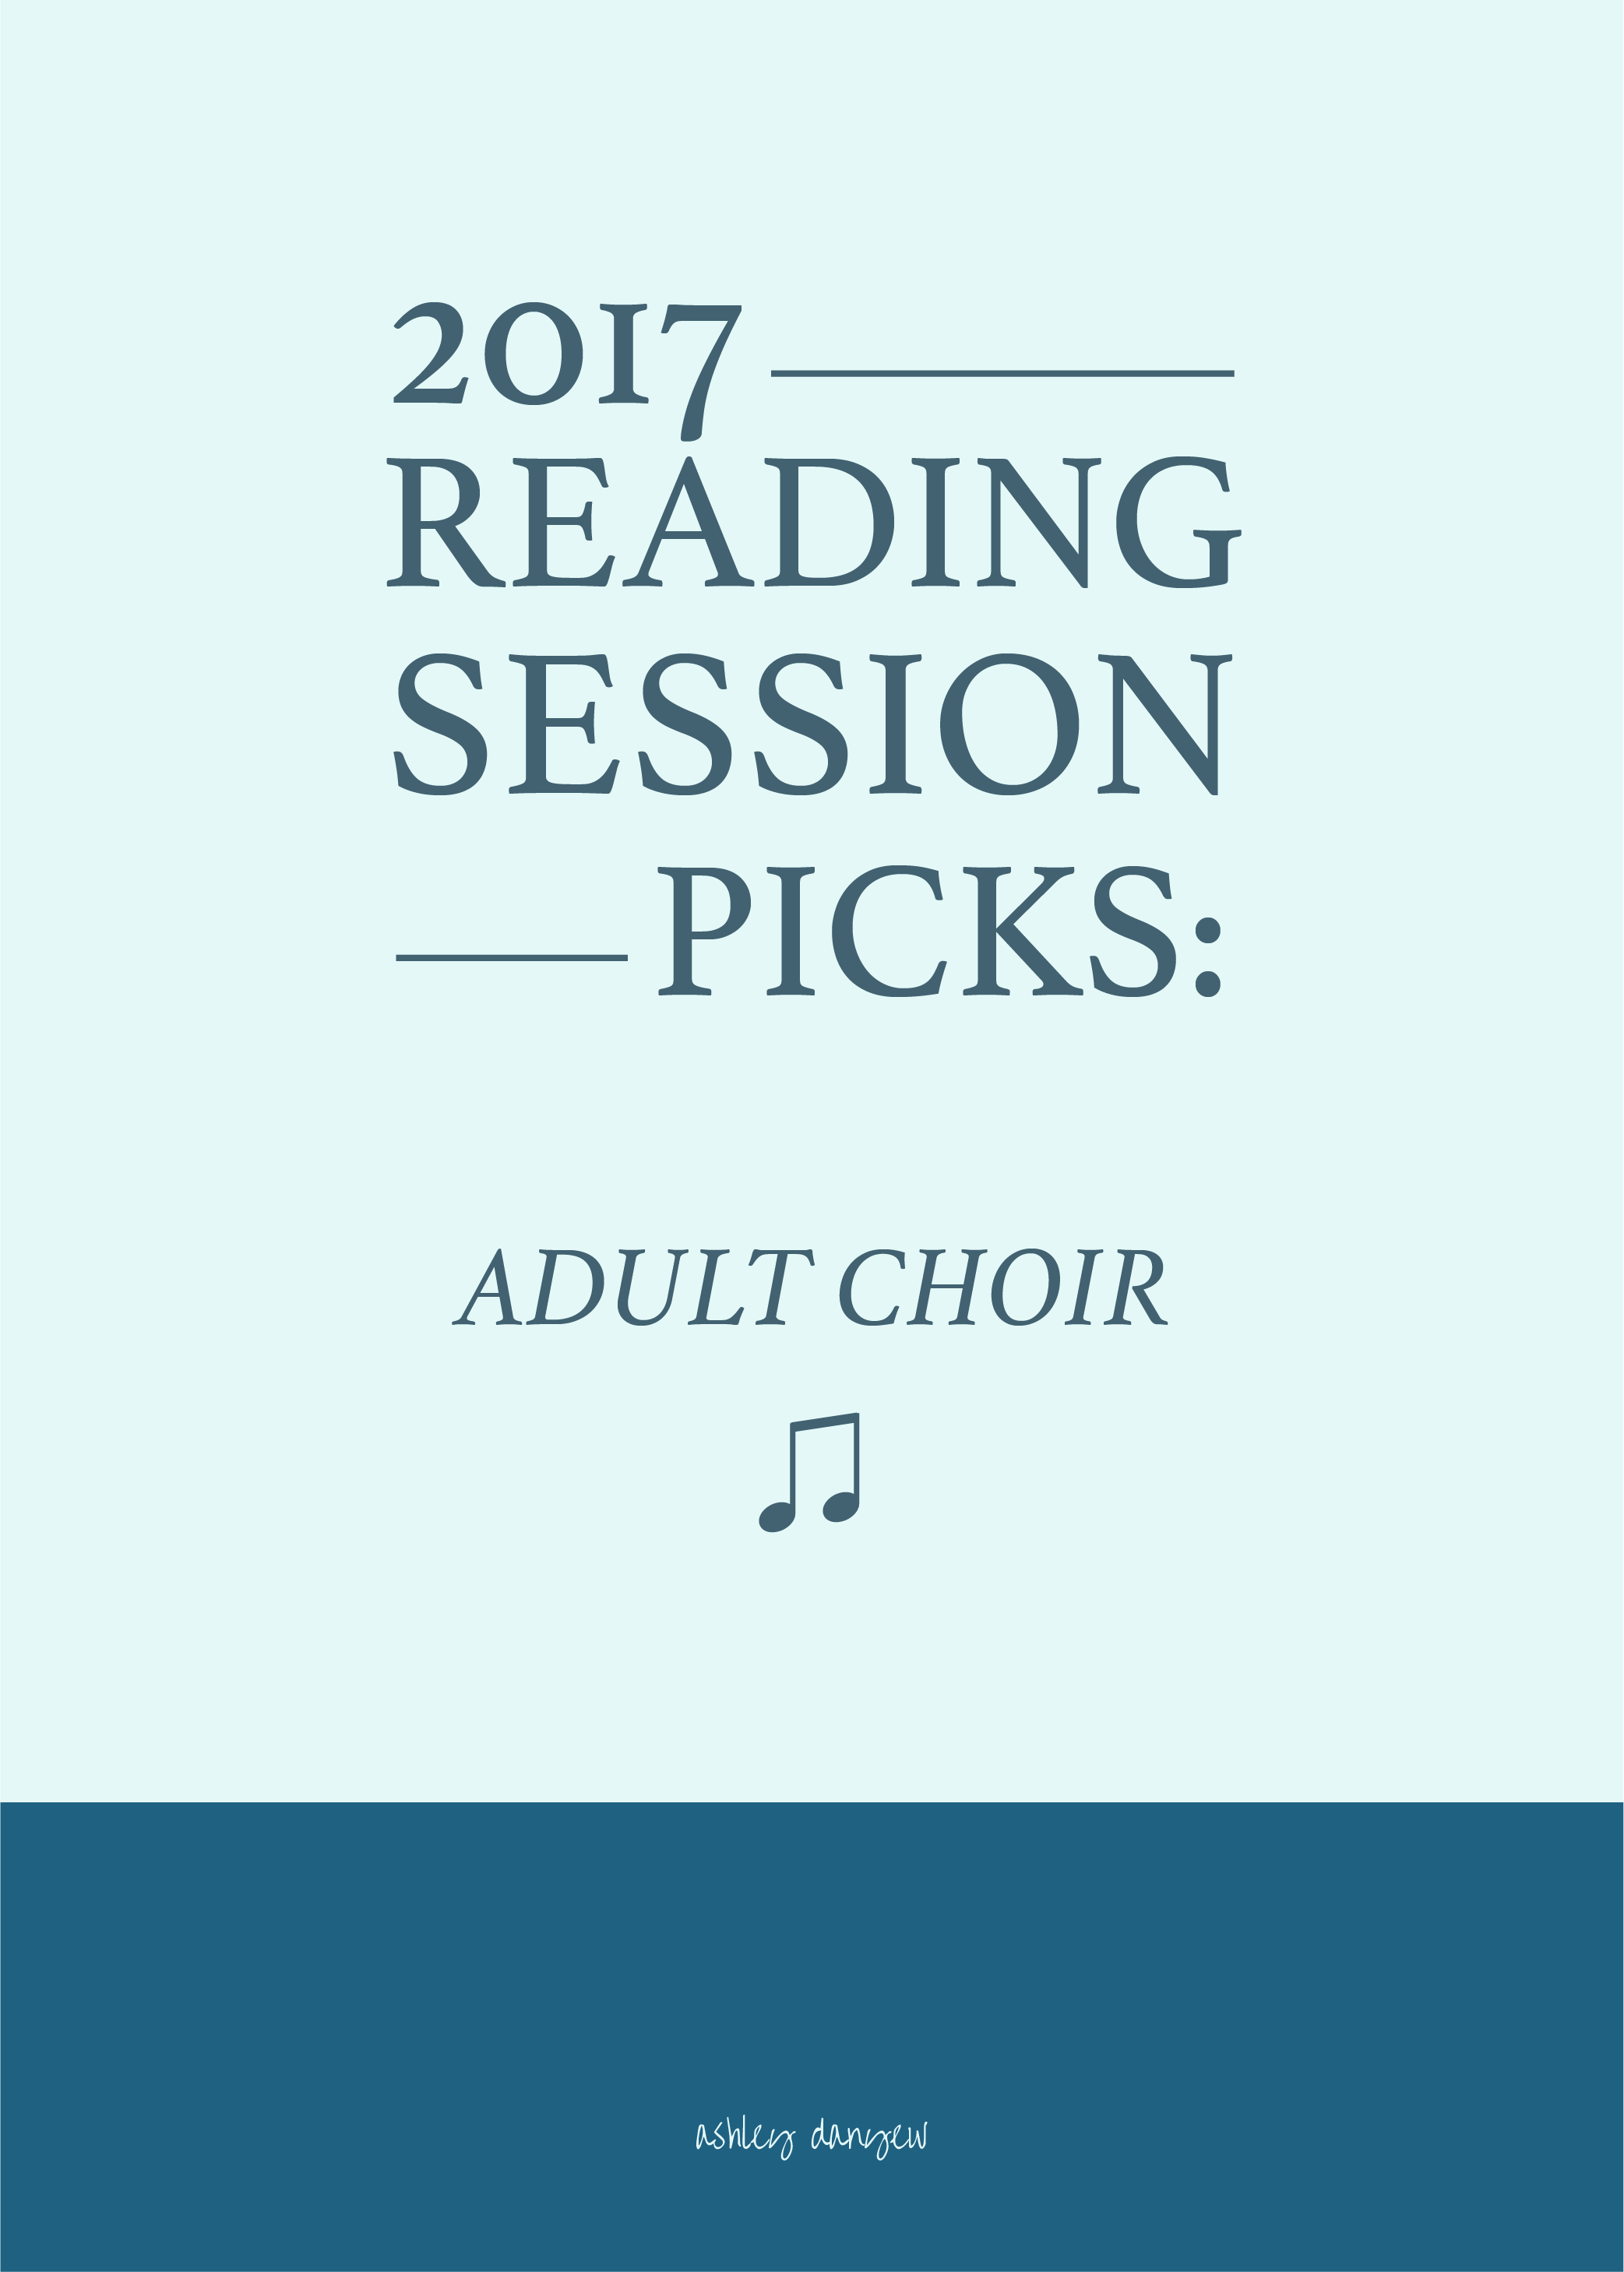 Copy of 2017 Reading Session Picks: Adult Choir